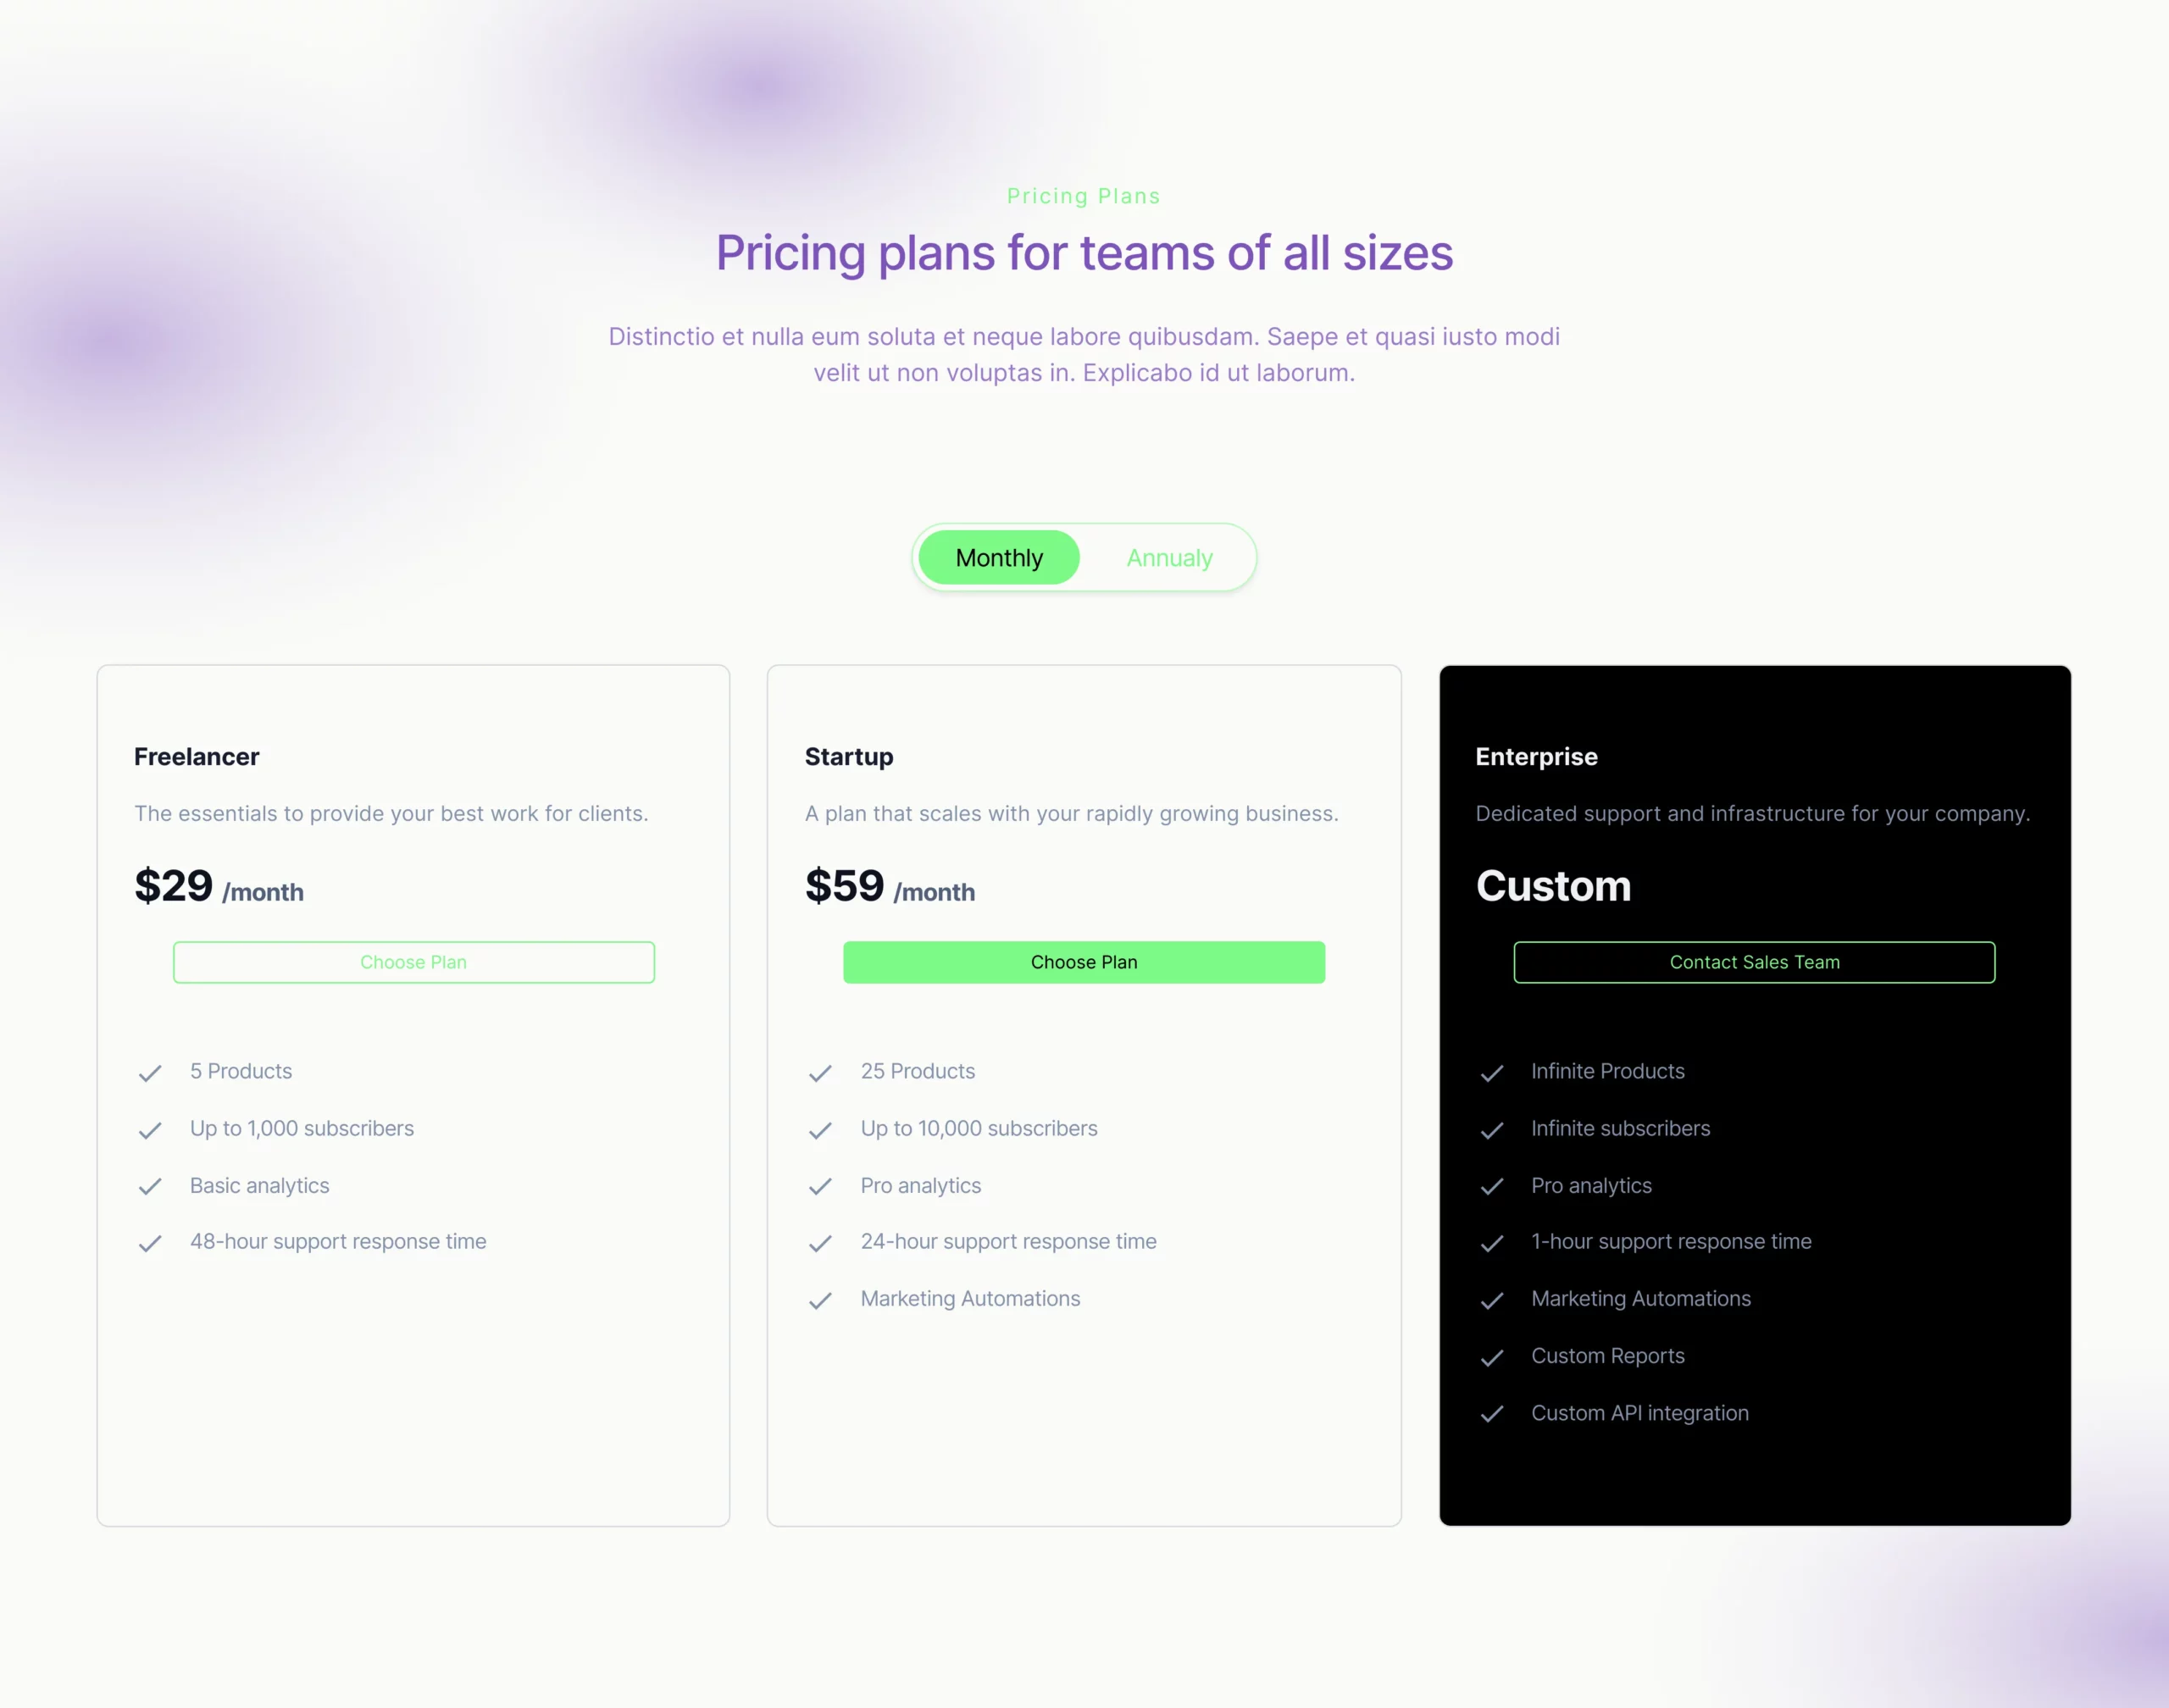 Three tiers with custom tier Bootstrap 5 components